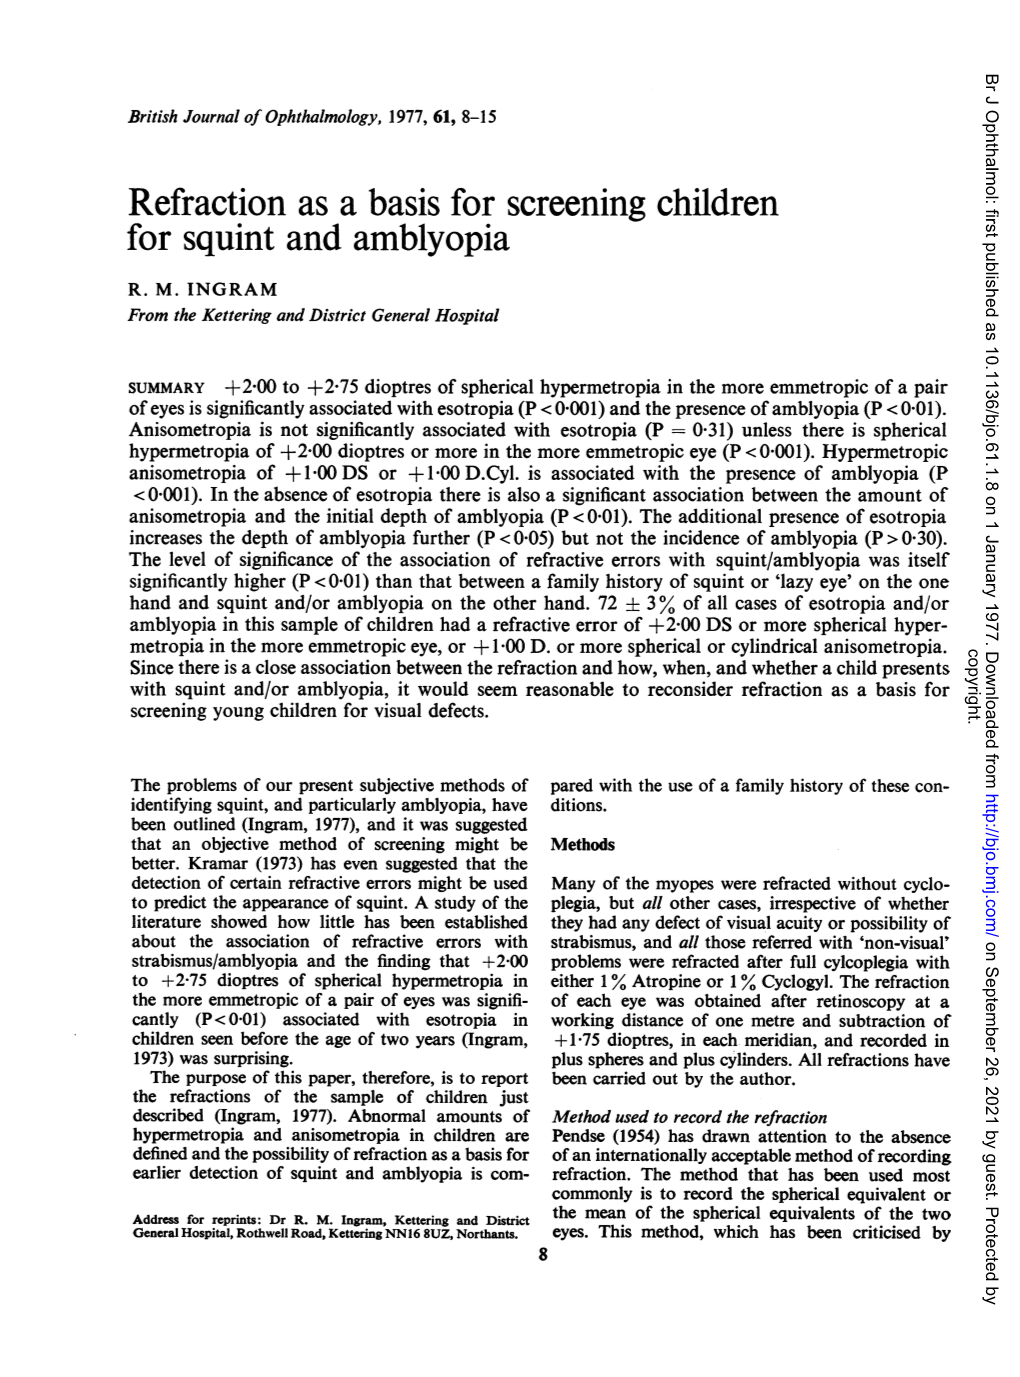 Refraction As a Basis for Screening Children for Squint and Amblyopia R